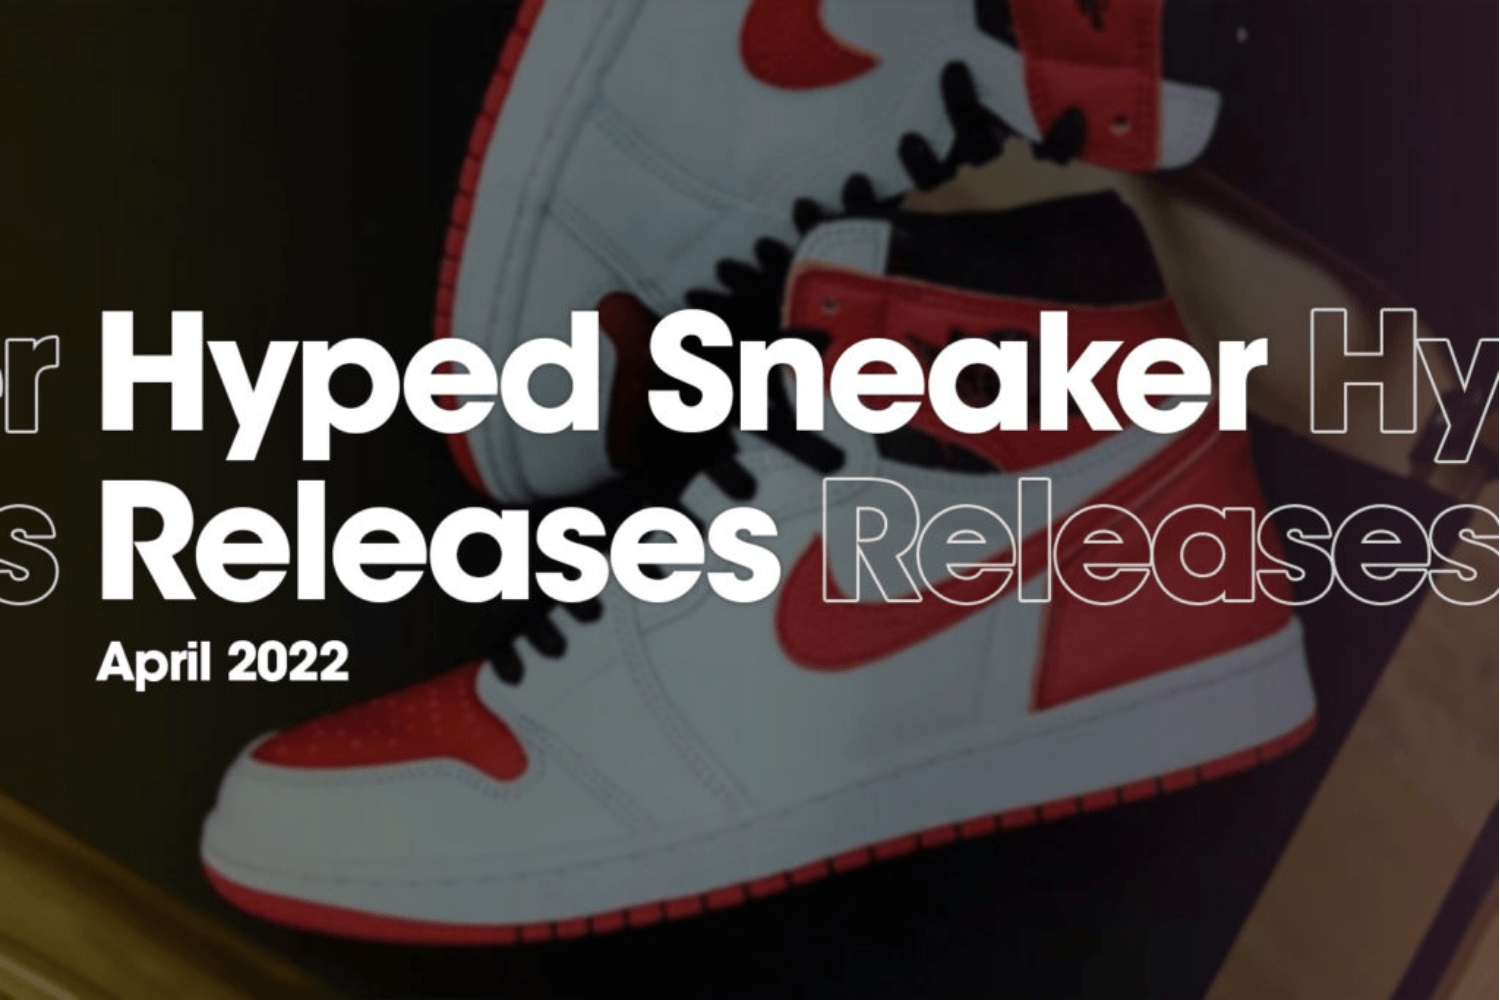 Hyped Sneaker Releases of April 2022